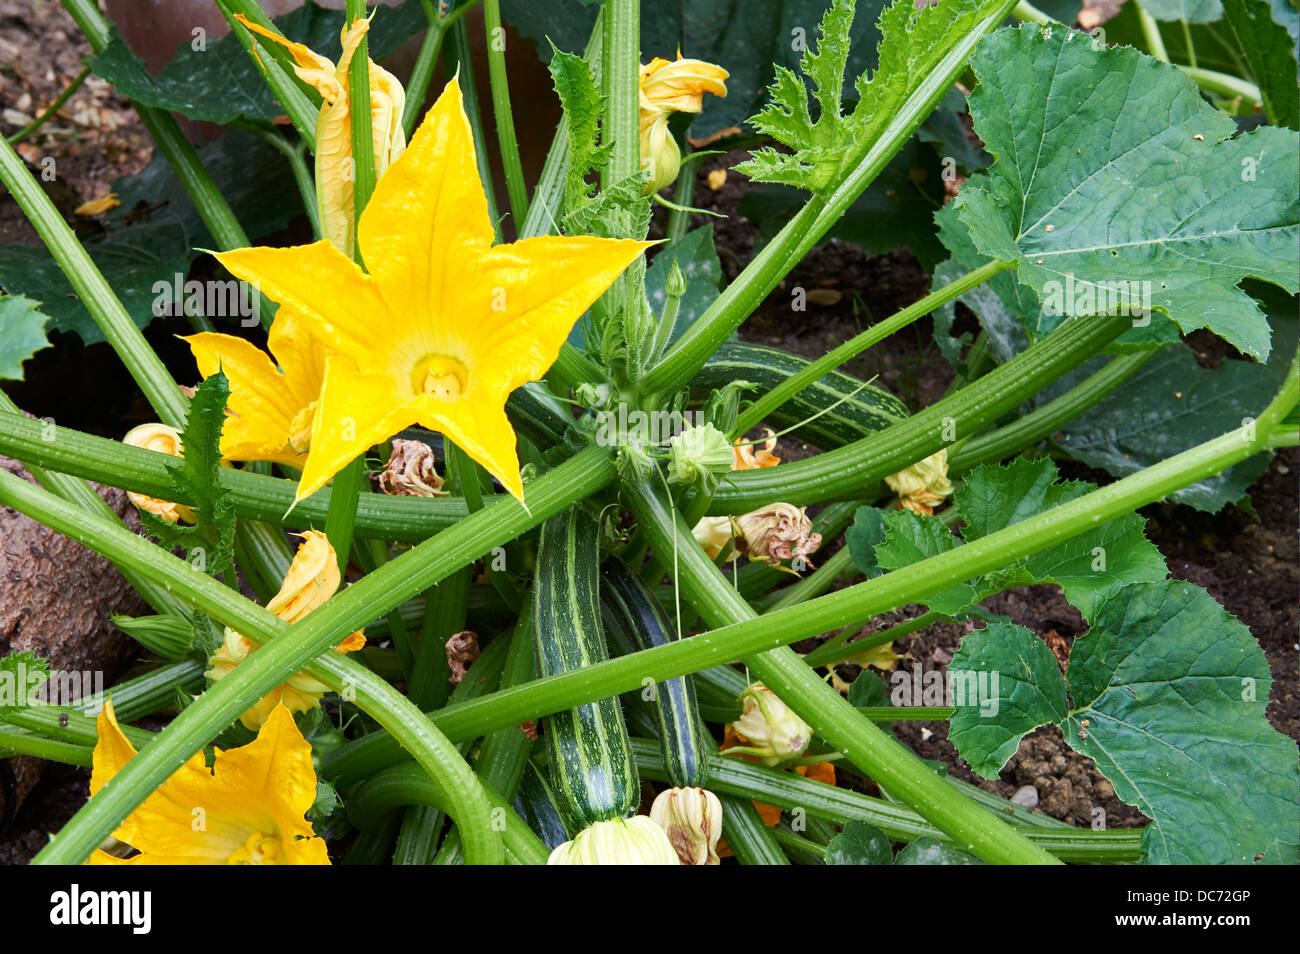 Courgette Plants with Yellow Flowers in Vegetable Garden. Stock Photo